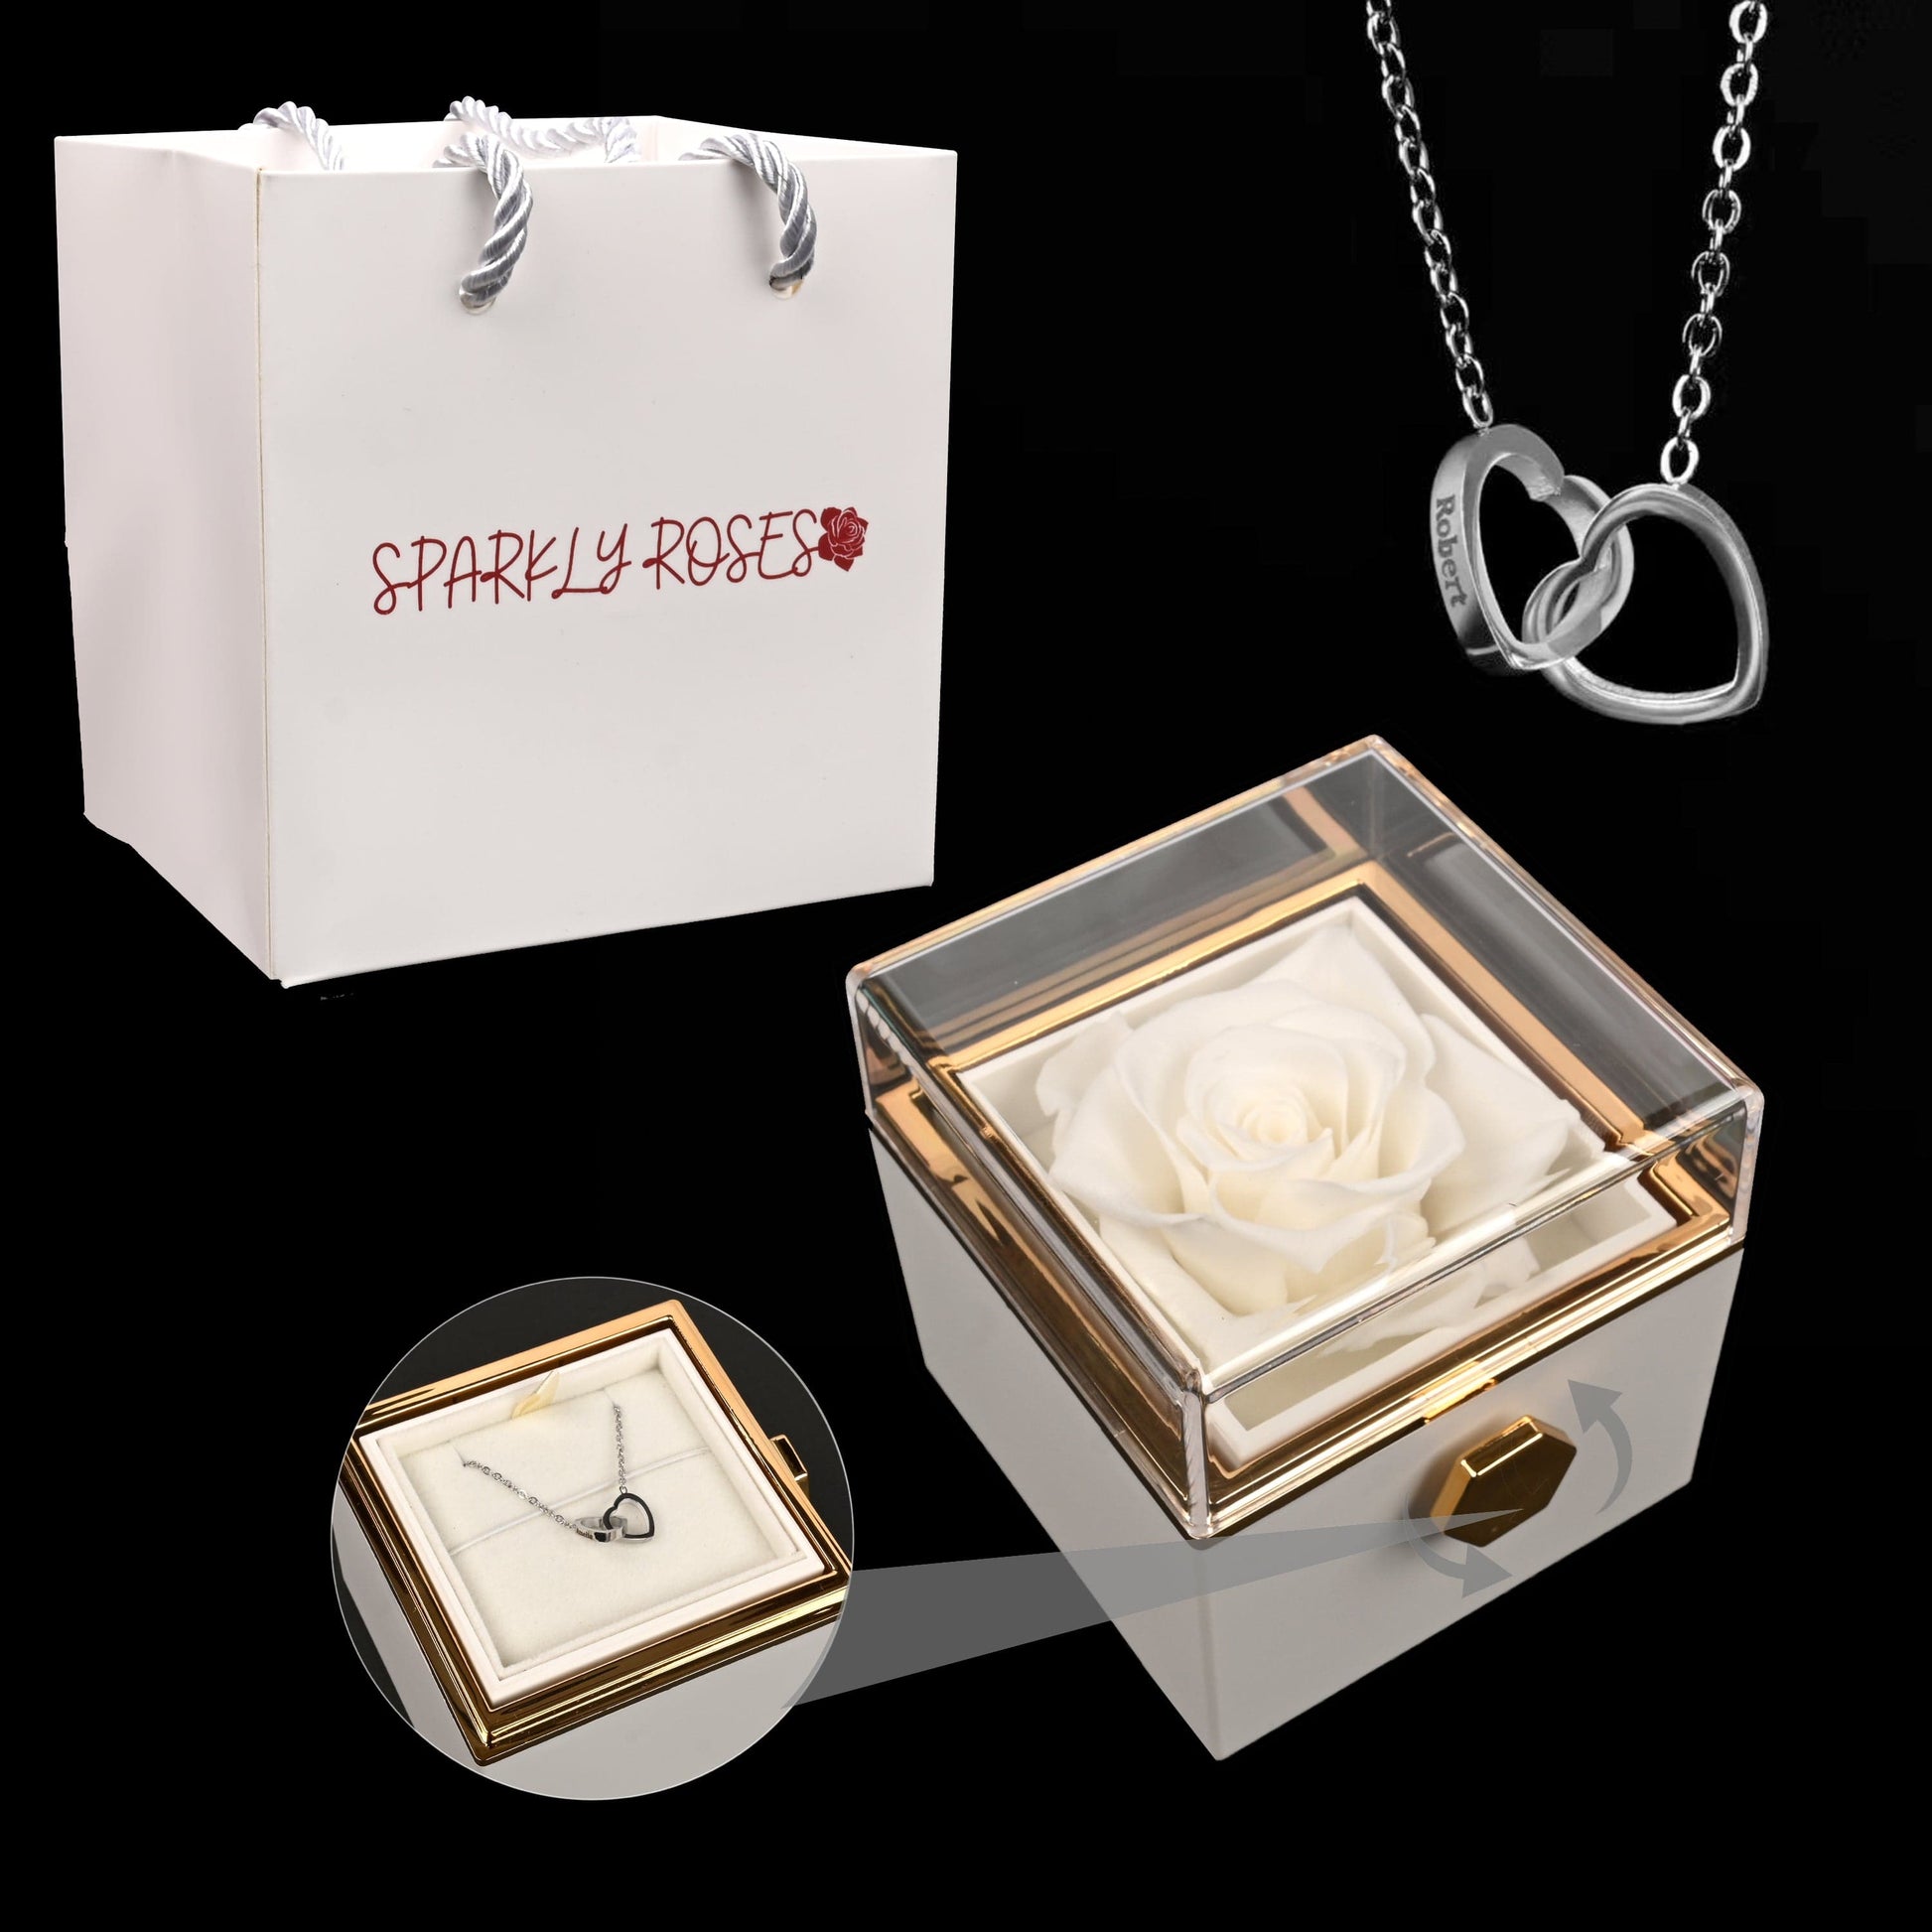 Sparkly Roses Eternal Rose Box - W/ Engraved Necklace & Real Rose White / Silver